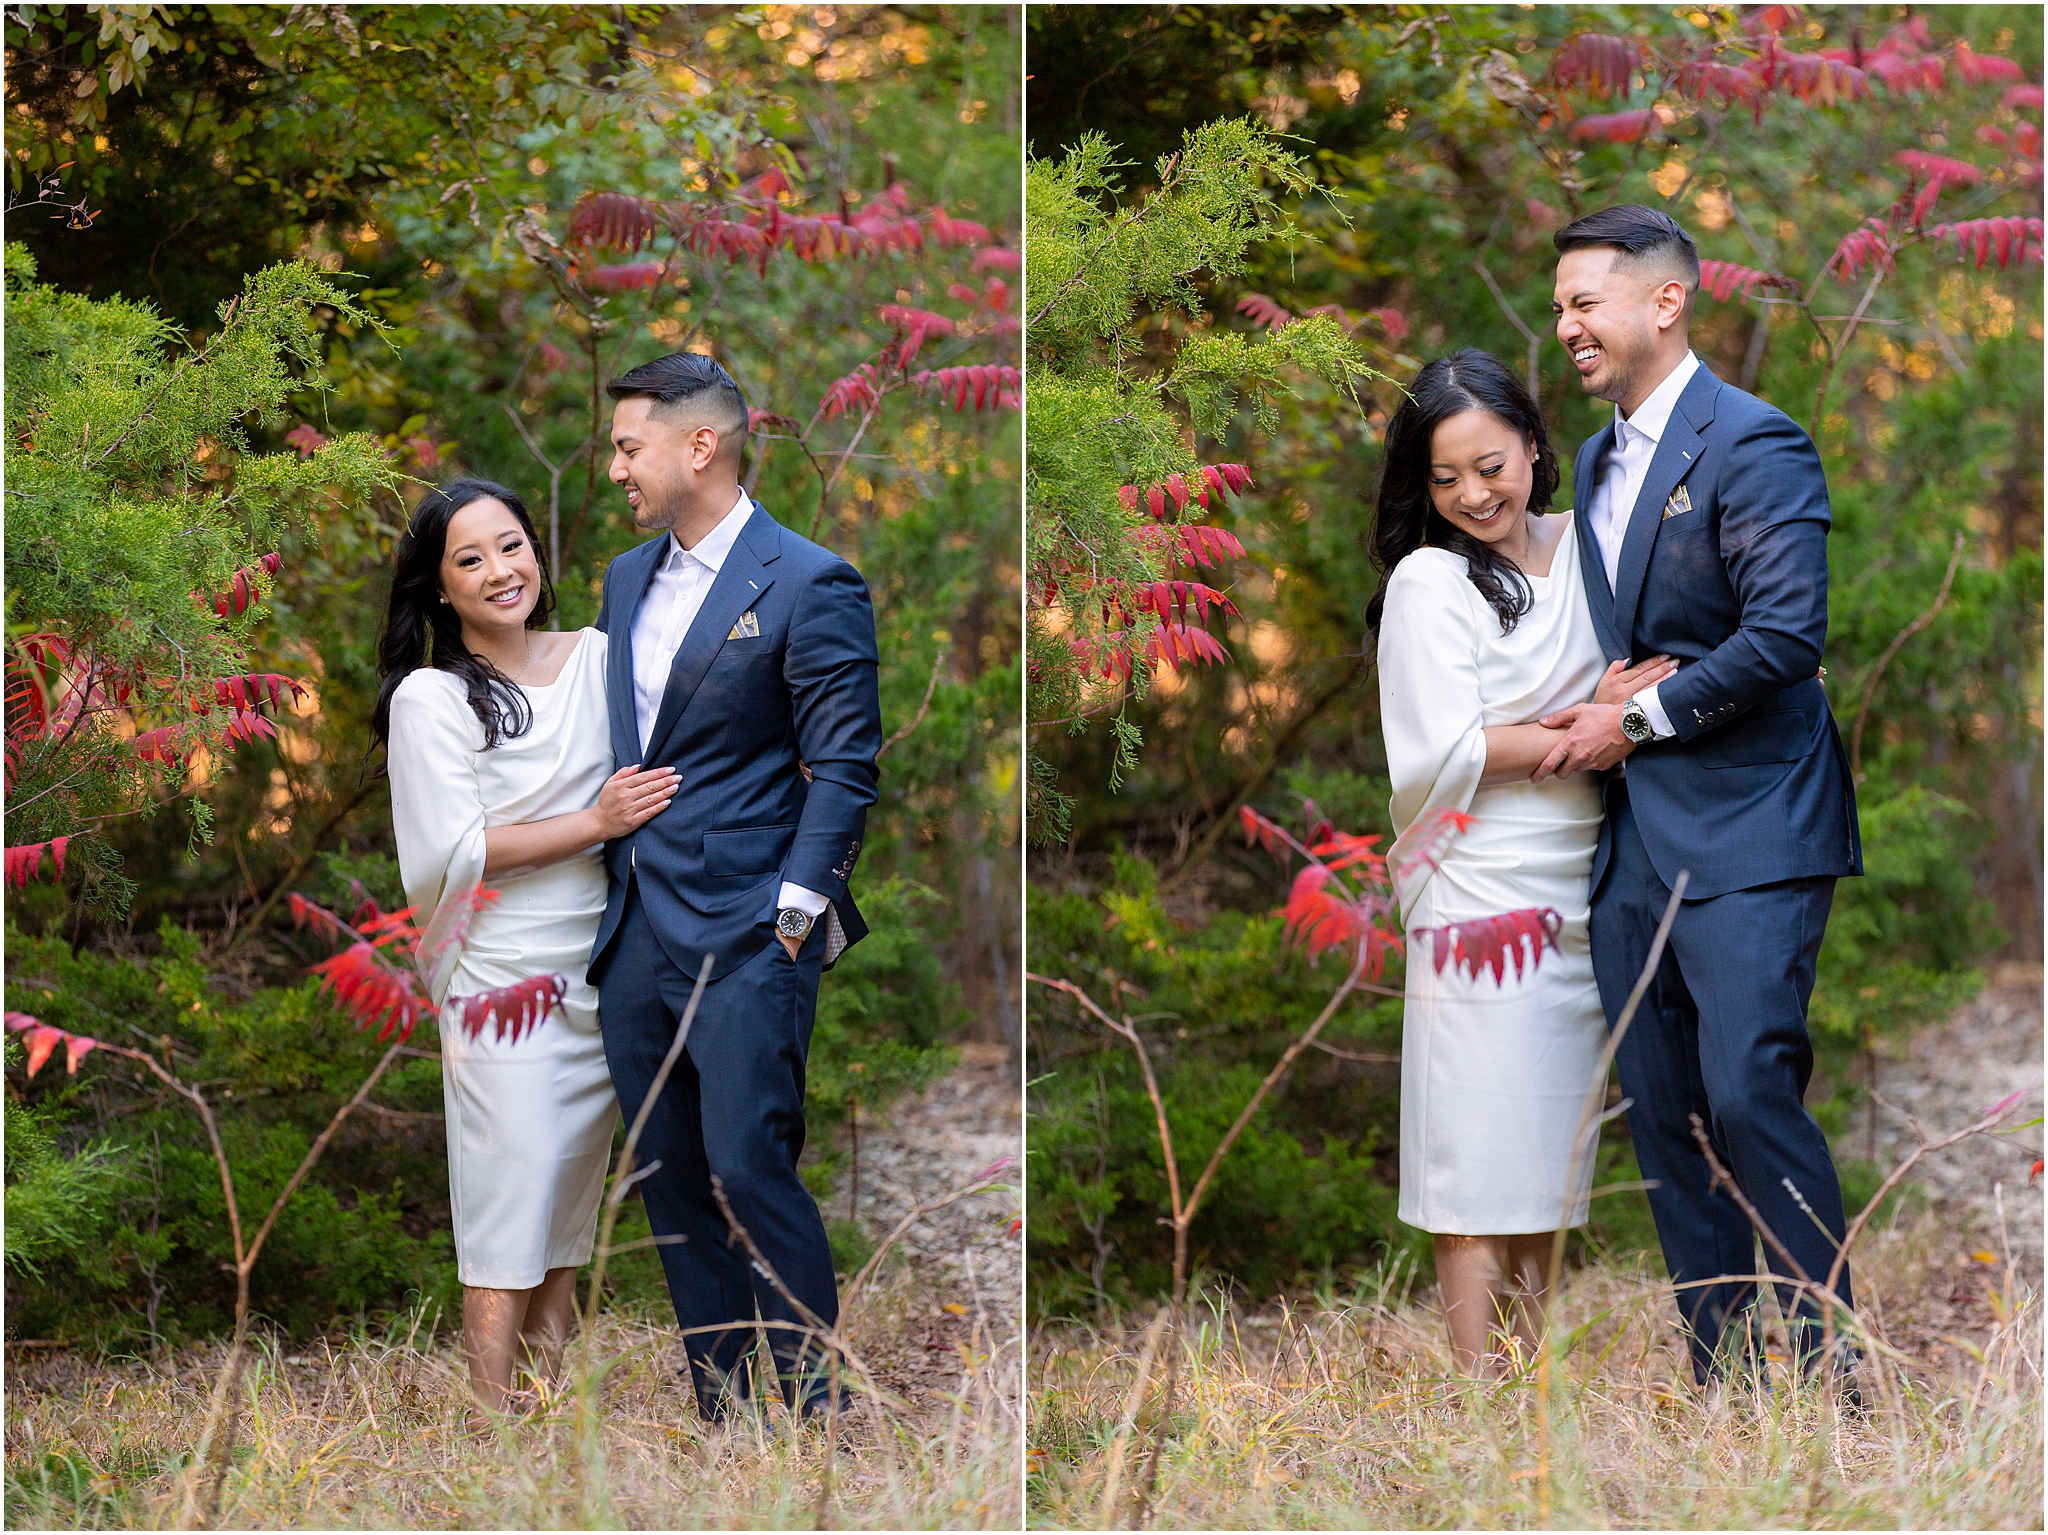 Dallas engagement session in nature preserve for outdoor images with man and woman embracing one another in the woods